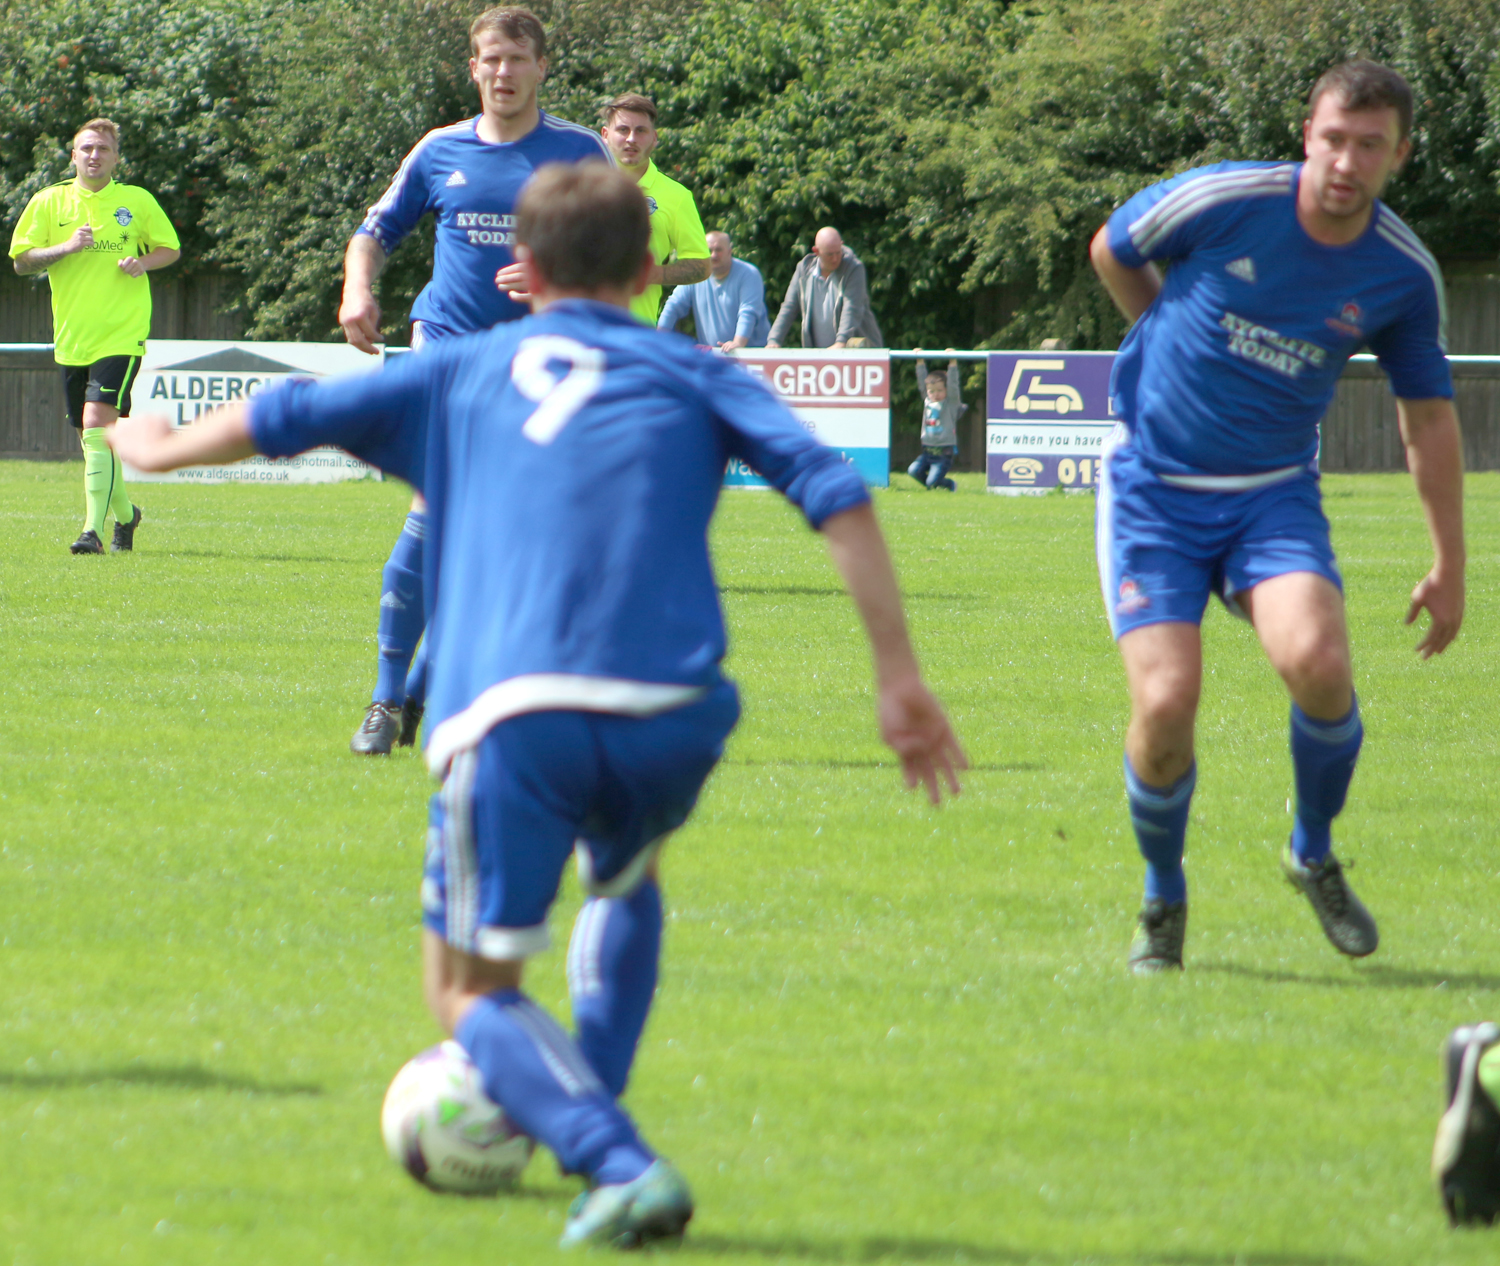 Strong Pre-Season Training by Aycliffe FC